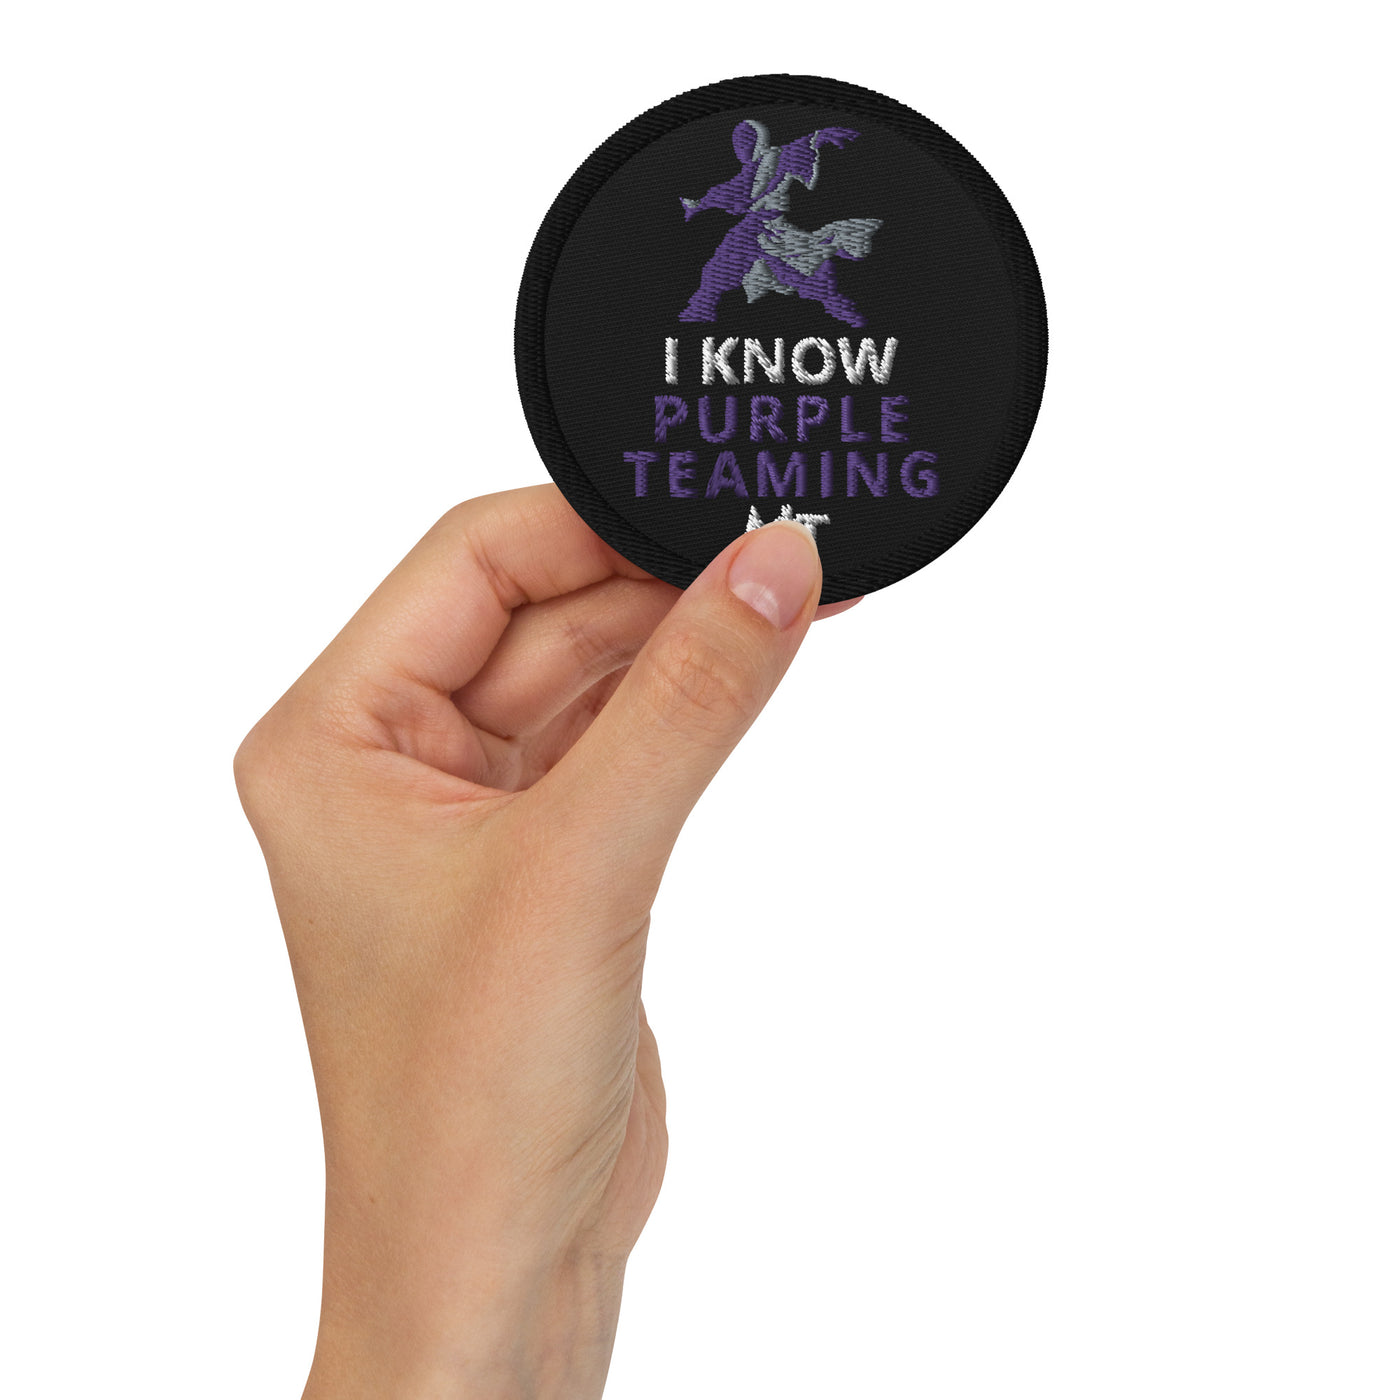 I Know Purple Teaming - Embroidered patches